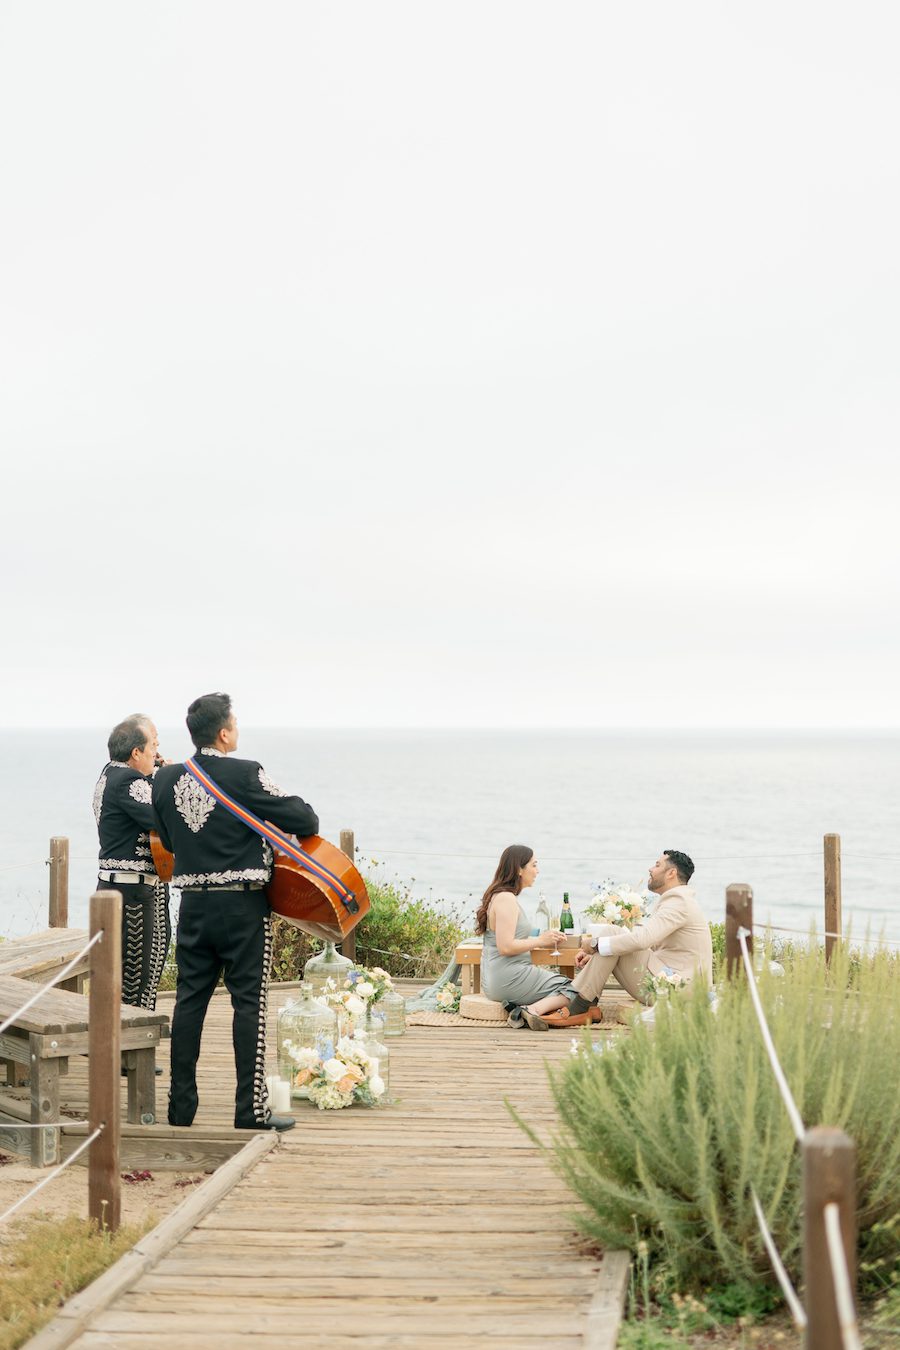 Ocean View Picnic Proposal in OC California with marachi band